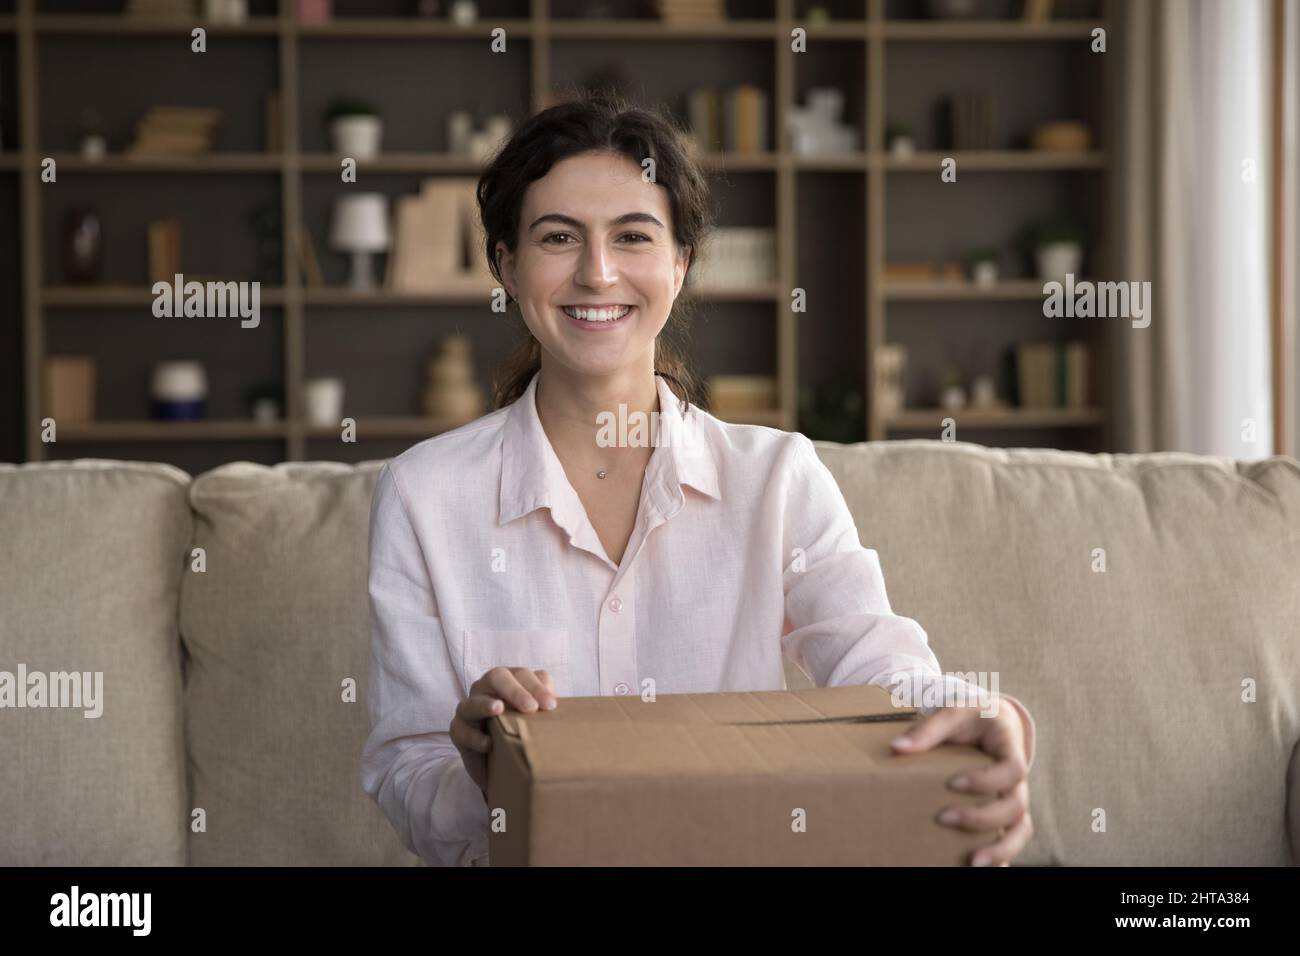 Portrait of smiling young Hispanic woman with carton box. Stock Photo